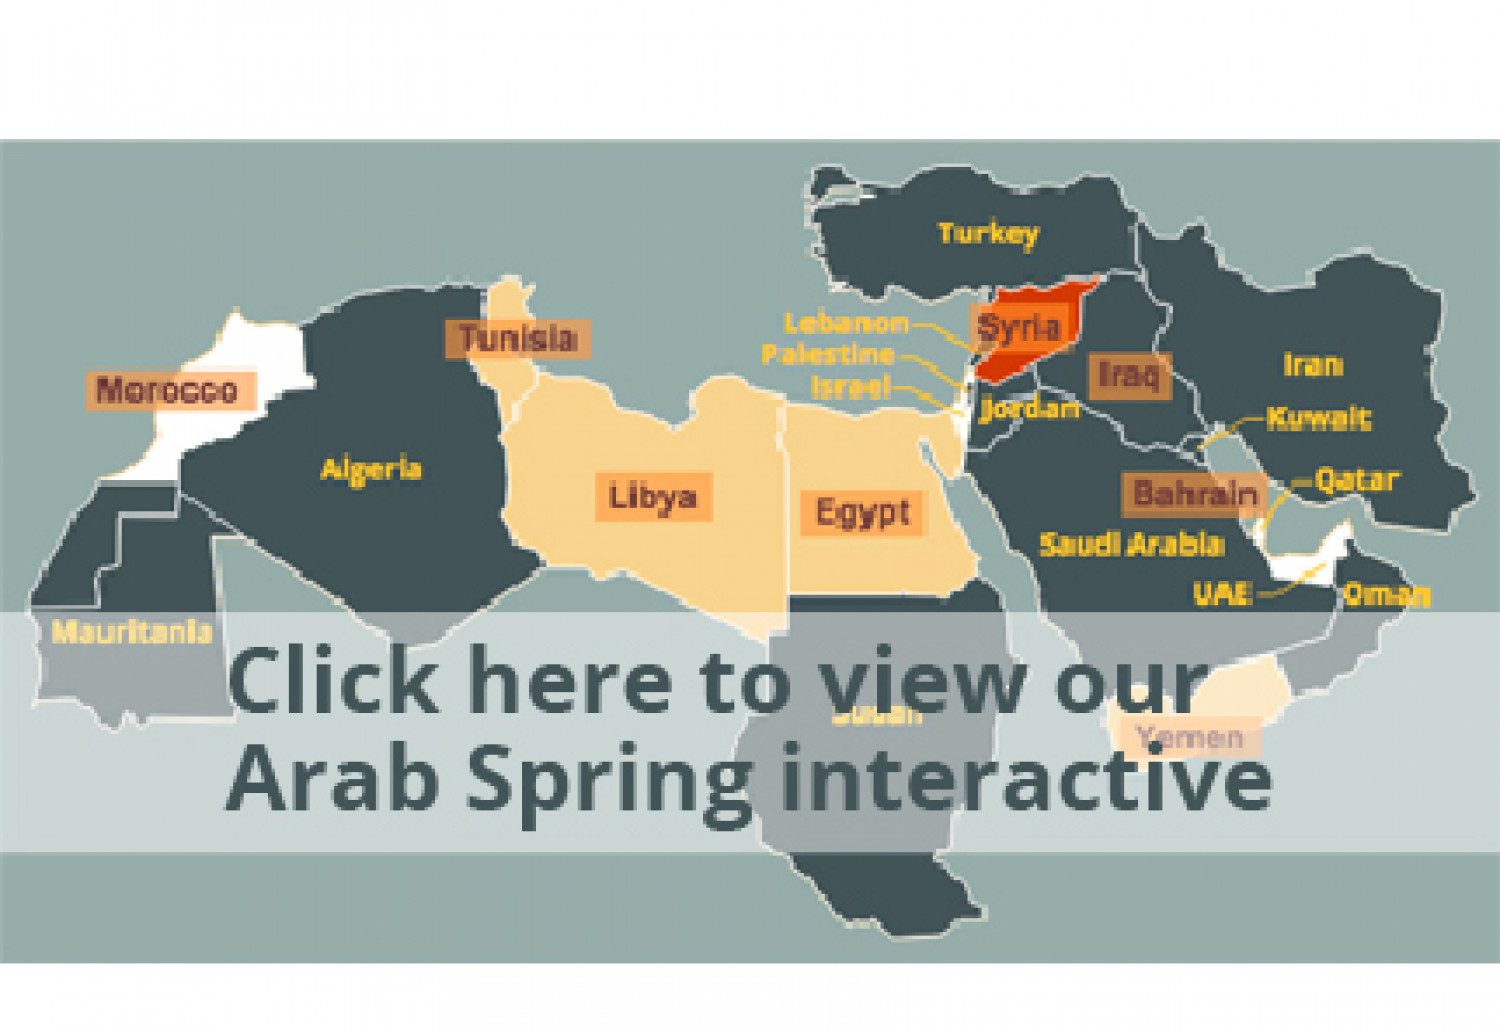 Four years after the Arab Spring uprising Infographic